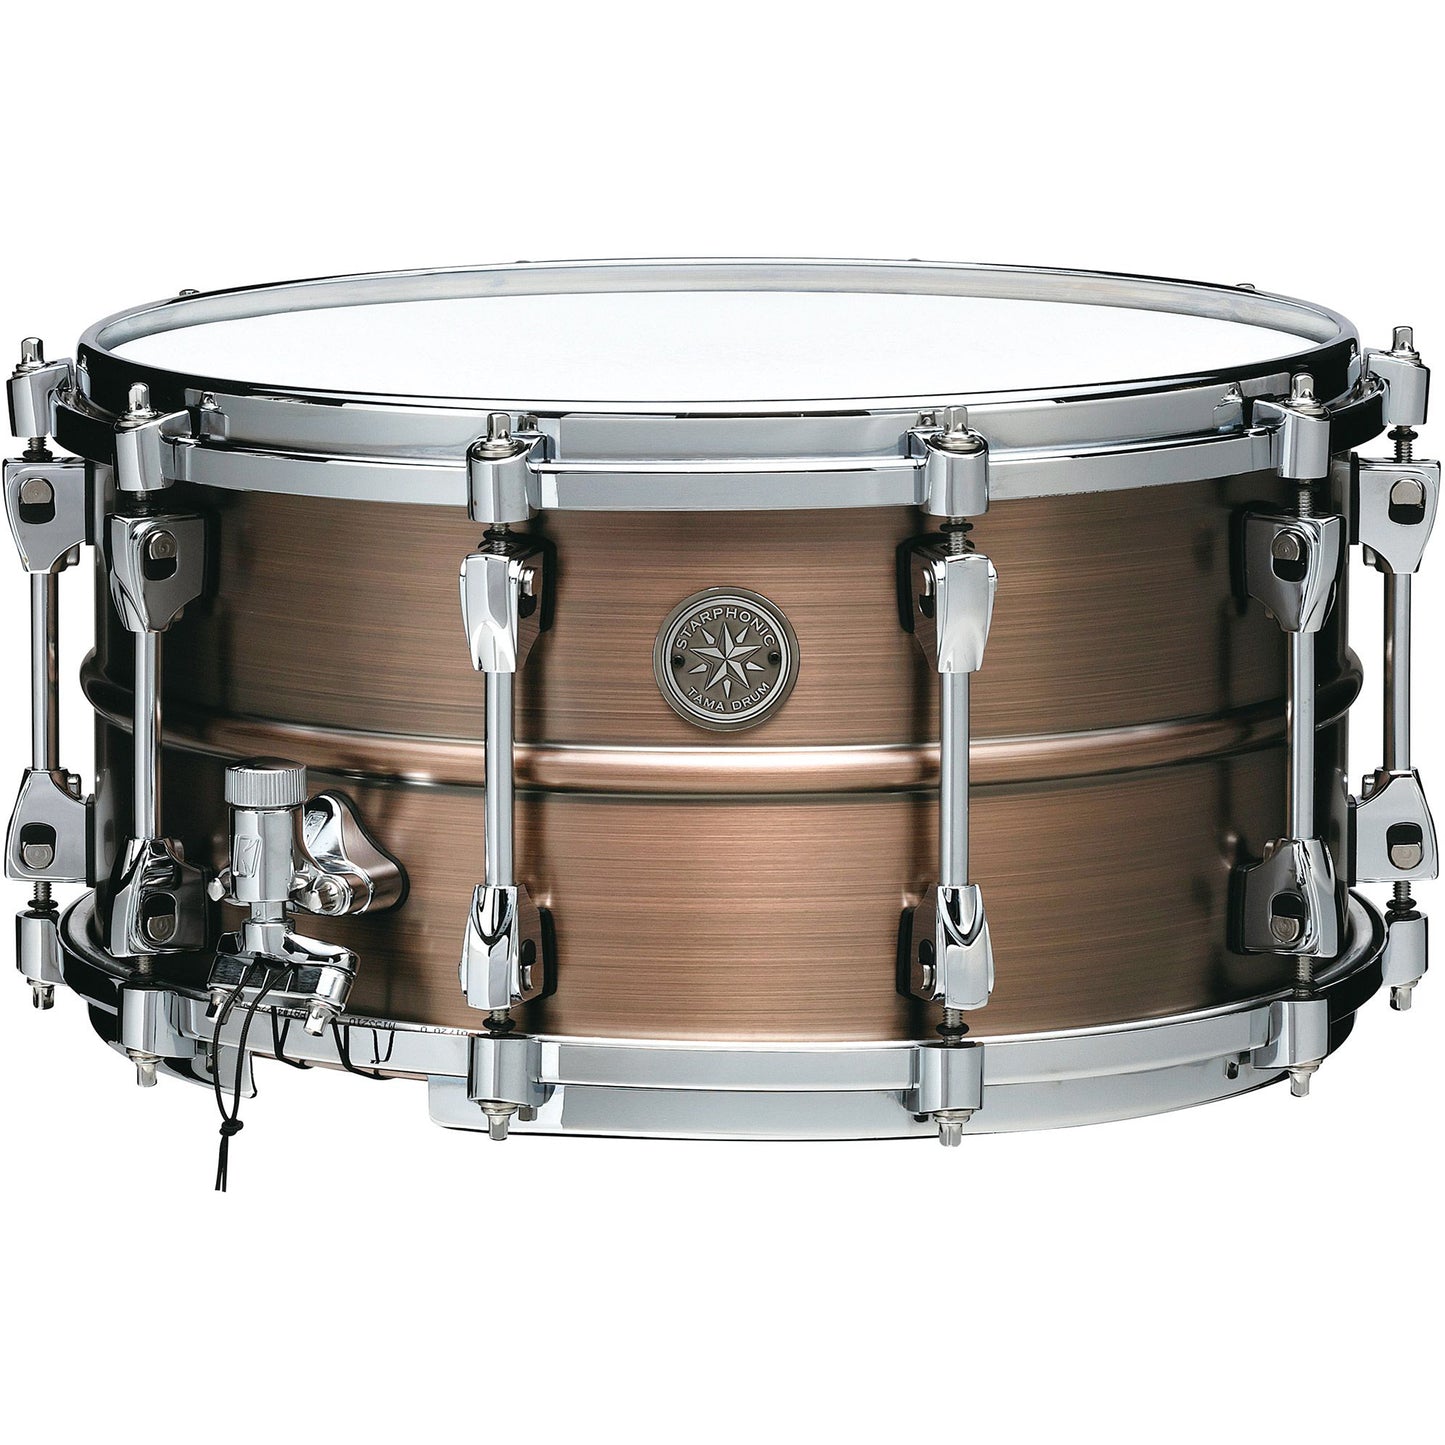 TAMA Starphonic Series PCP147 7x14 1.2mm Snare Drum Copper Shell Satin Hairline